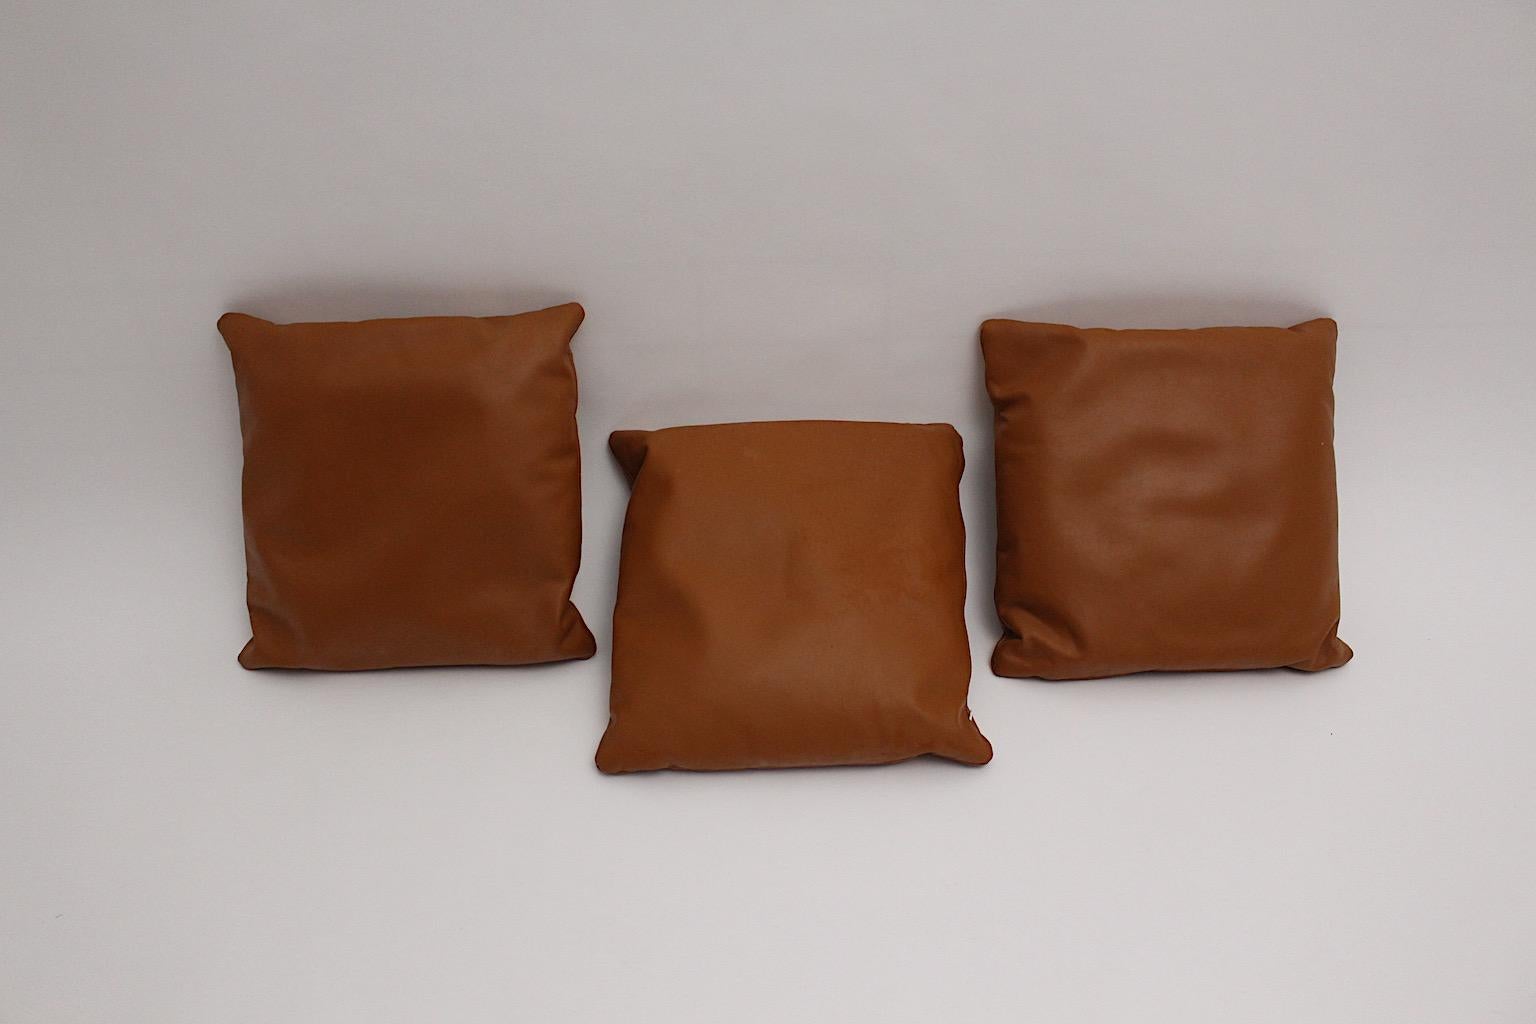 A brown vintage stitched set of three leather pillows, which were designed and made 1970s, Switzerland.
The pillows show beautiful warm cognac brown tone and a squared shape.
To open with a zipper.
The vintage condition is very good with great